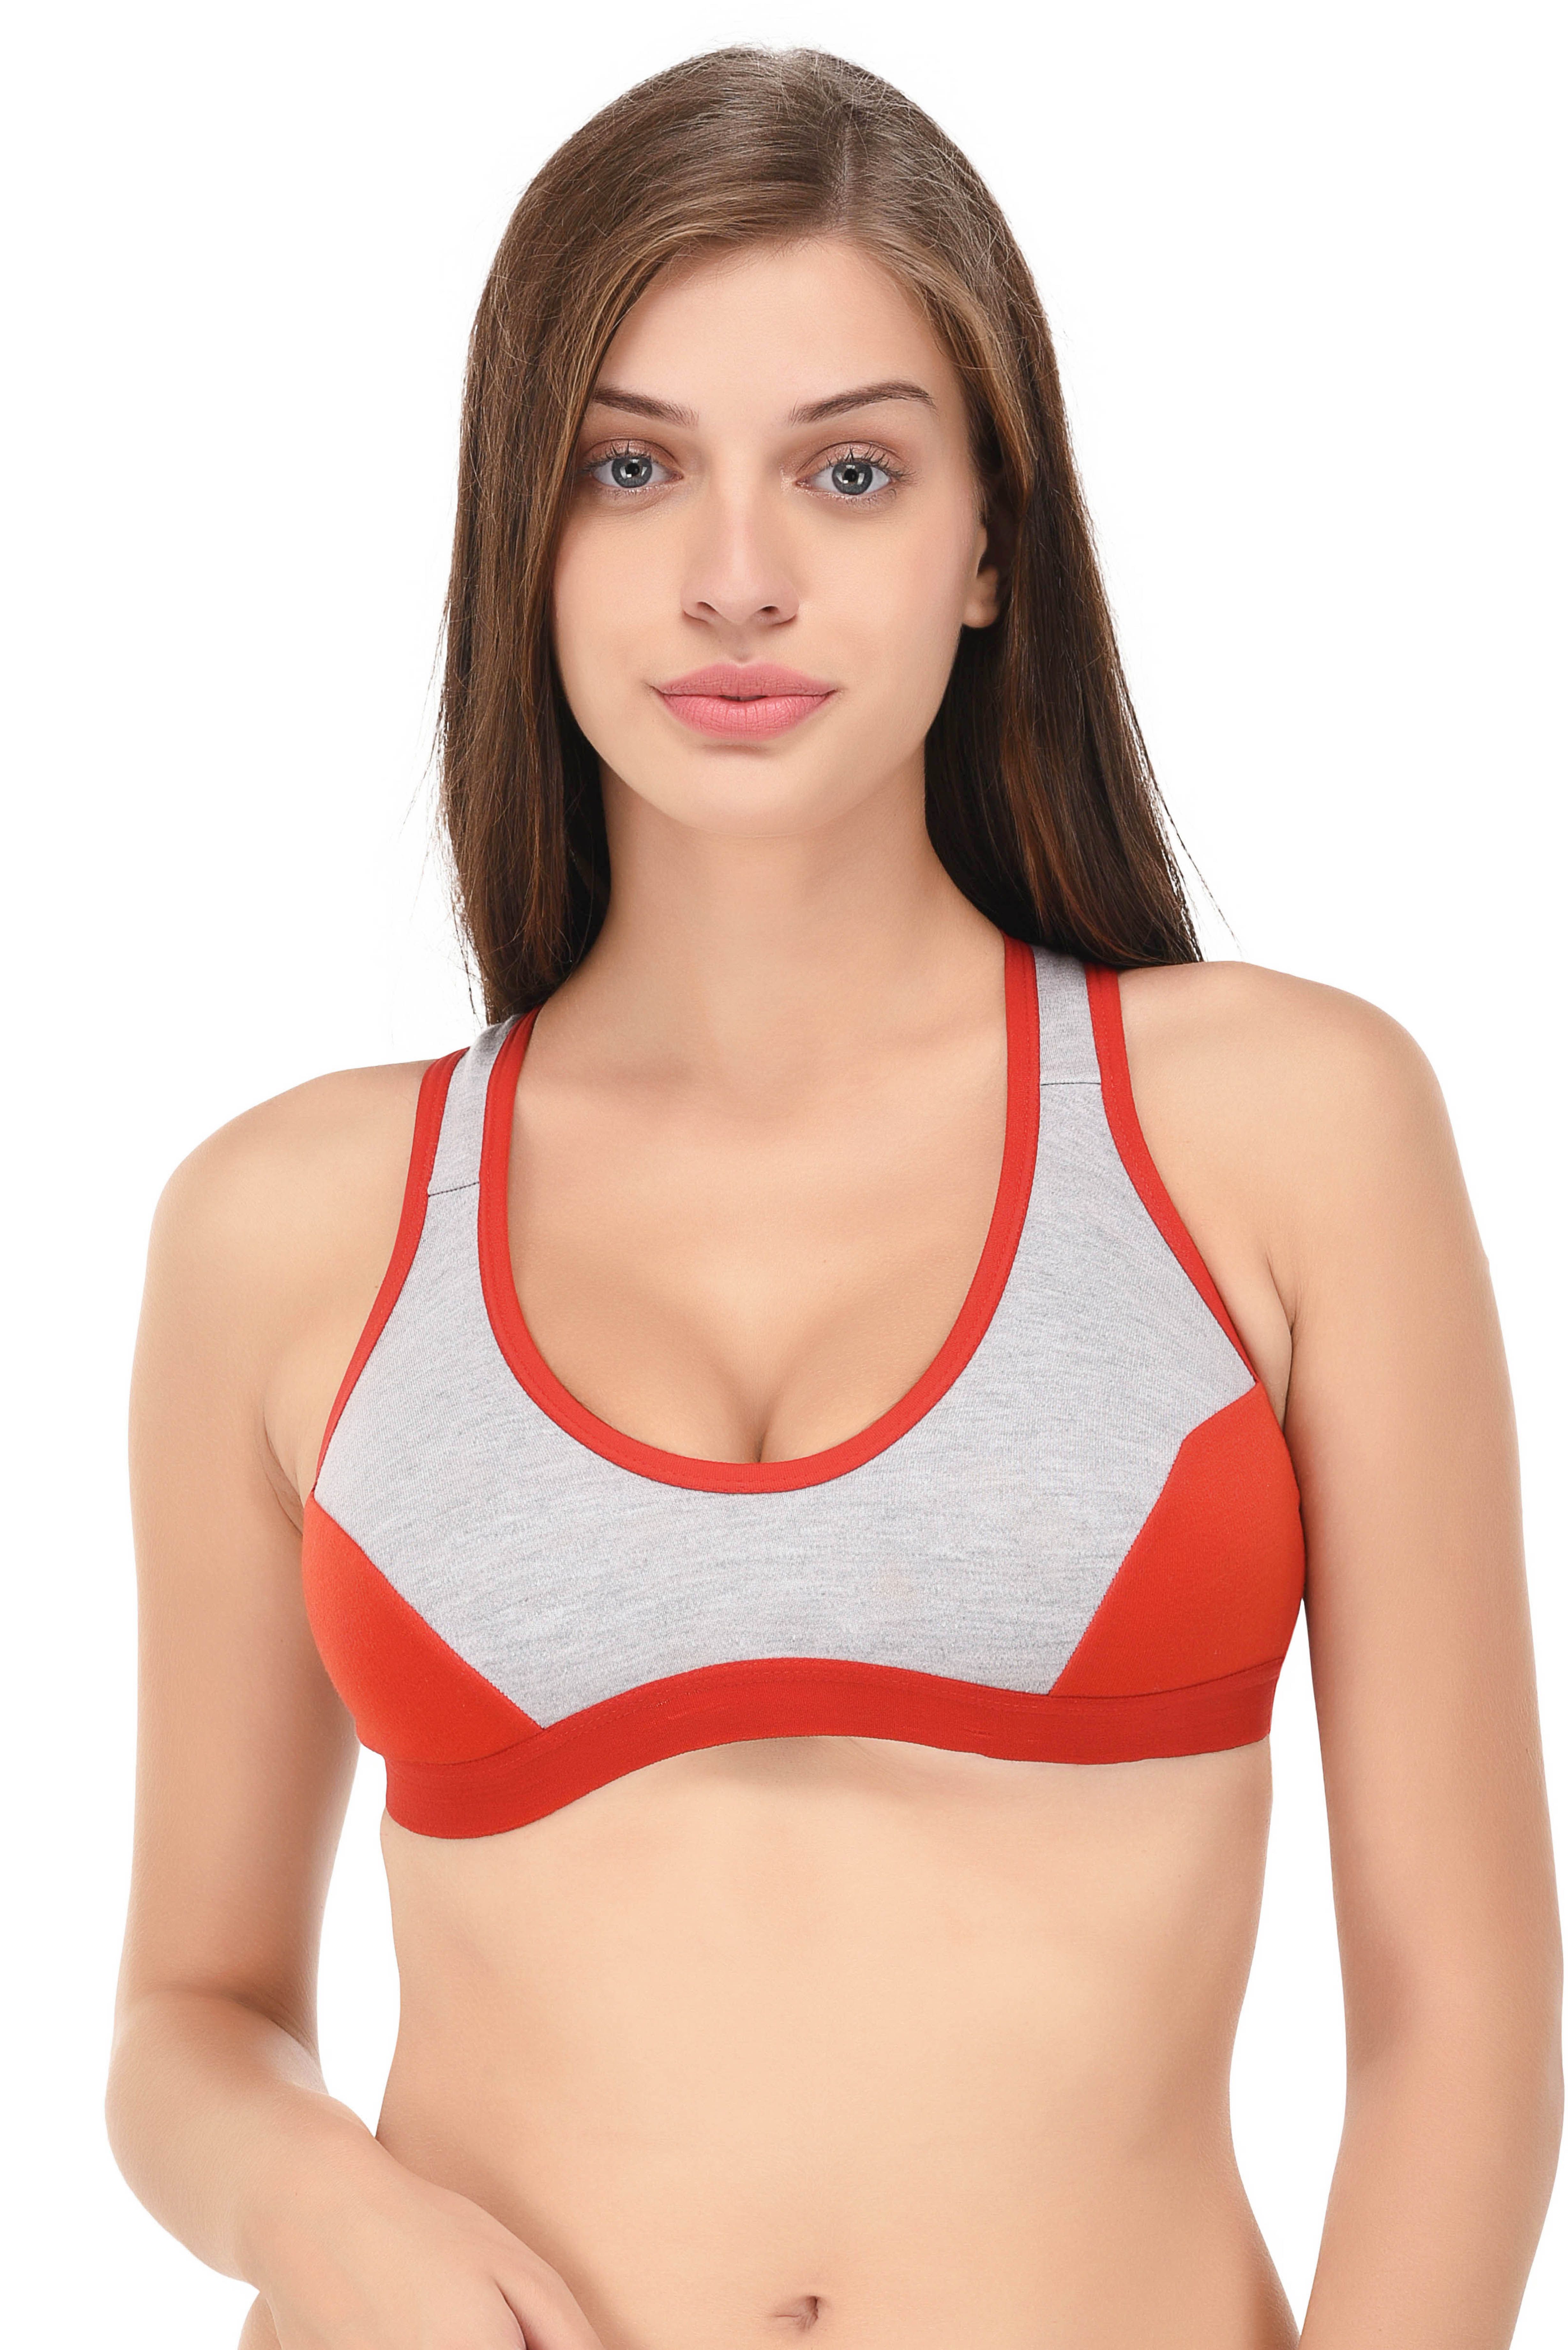 Buy Lizaray Cotton Sports Bra Red Online At Best Prices In India Snapdeal